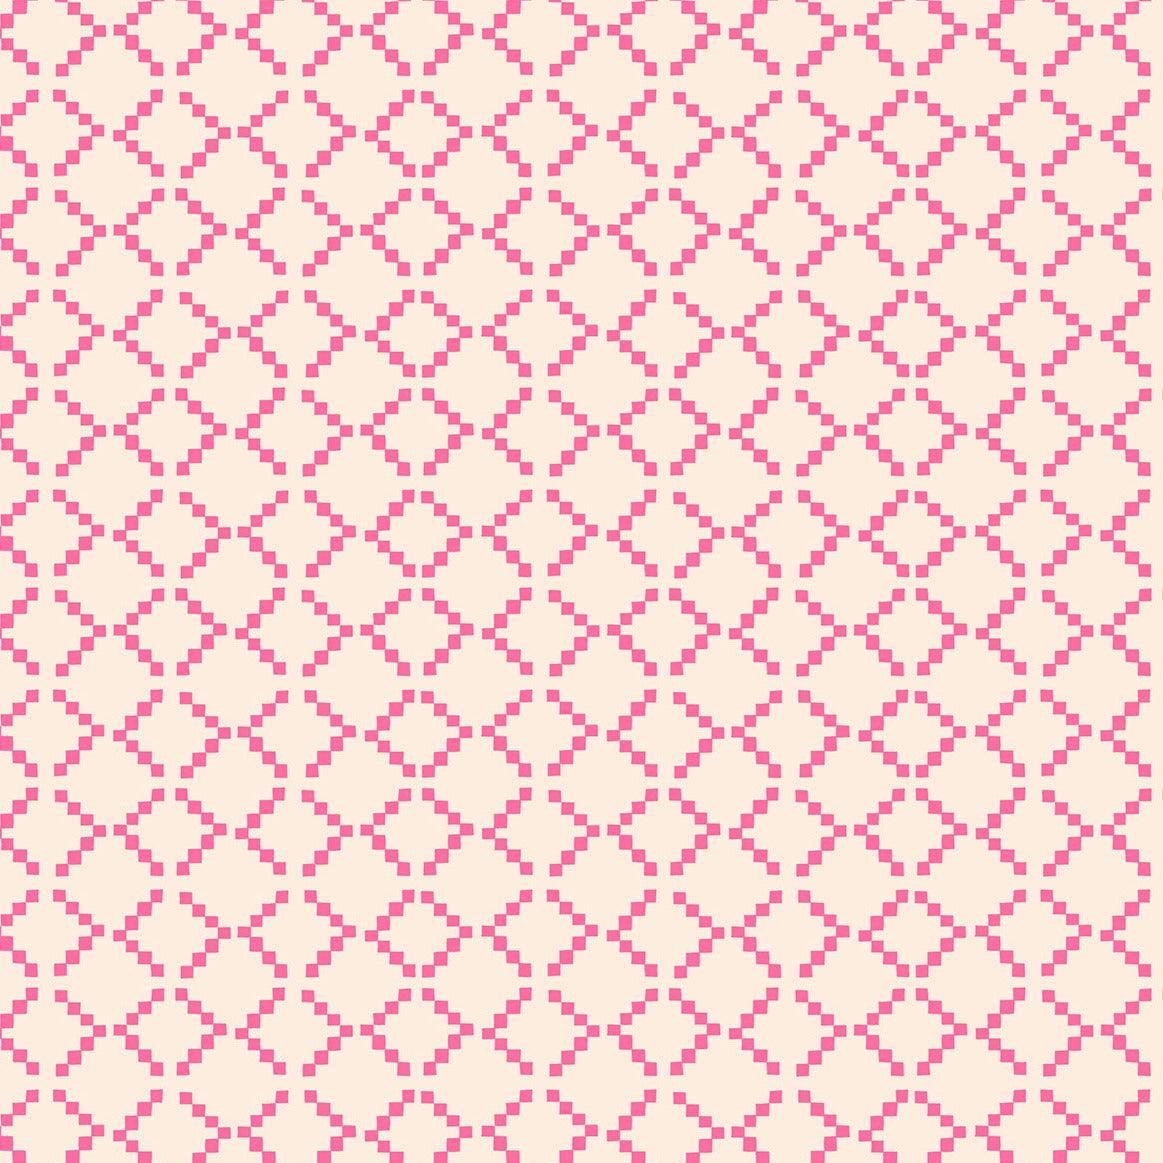 Ruby Star Society-Tiny Tiles Neon Pink-fabric-gather here online